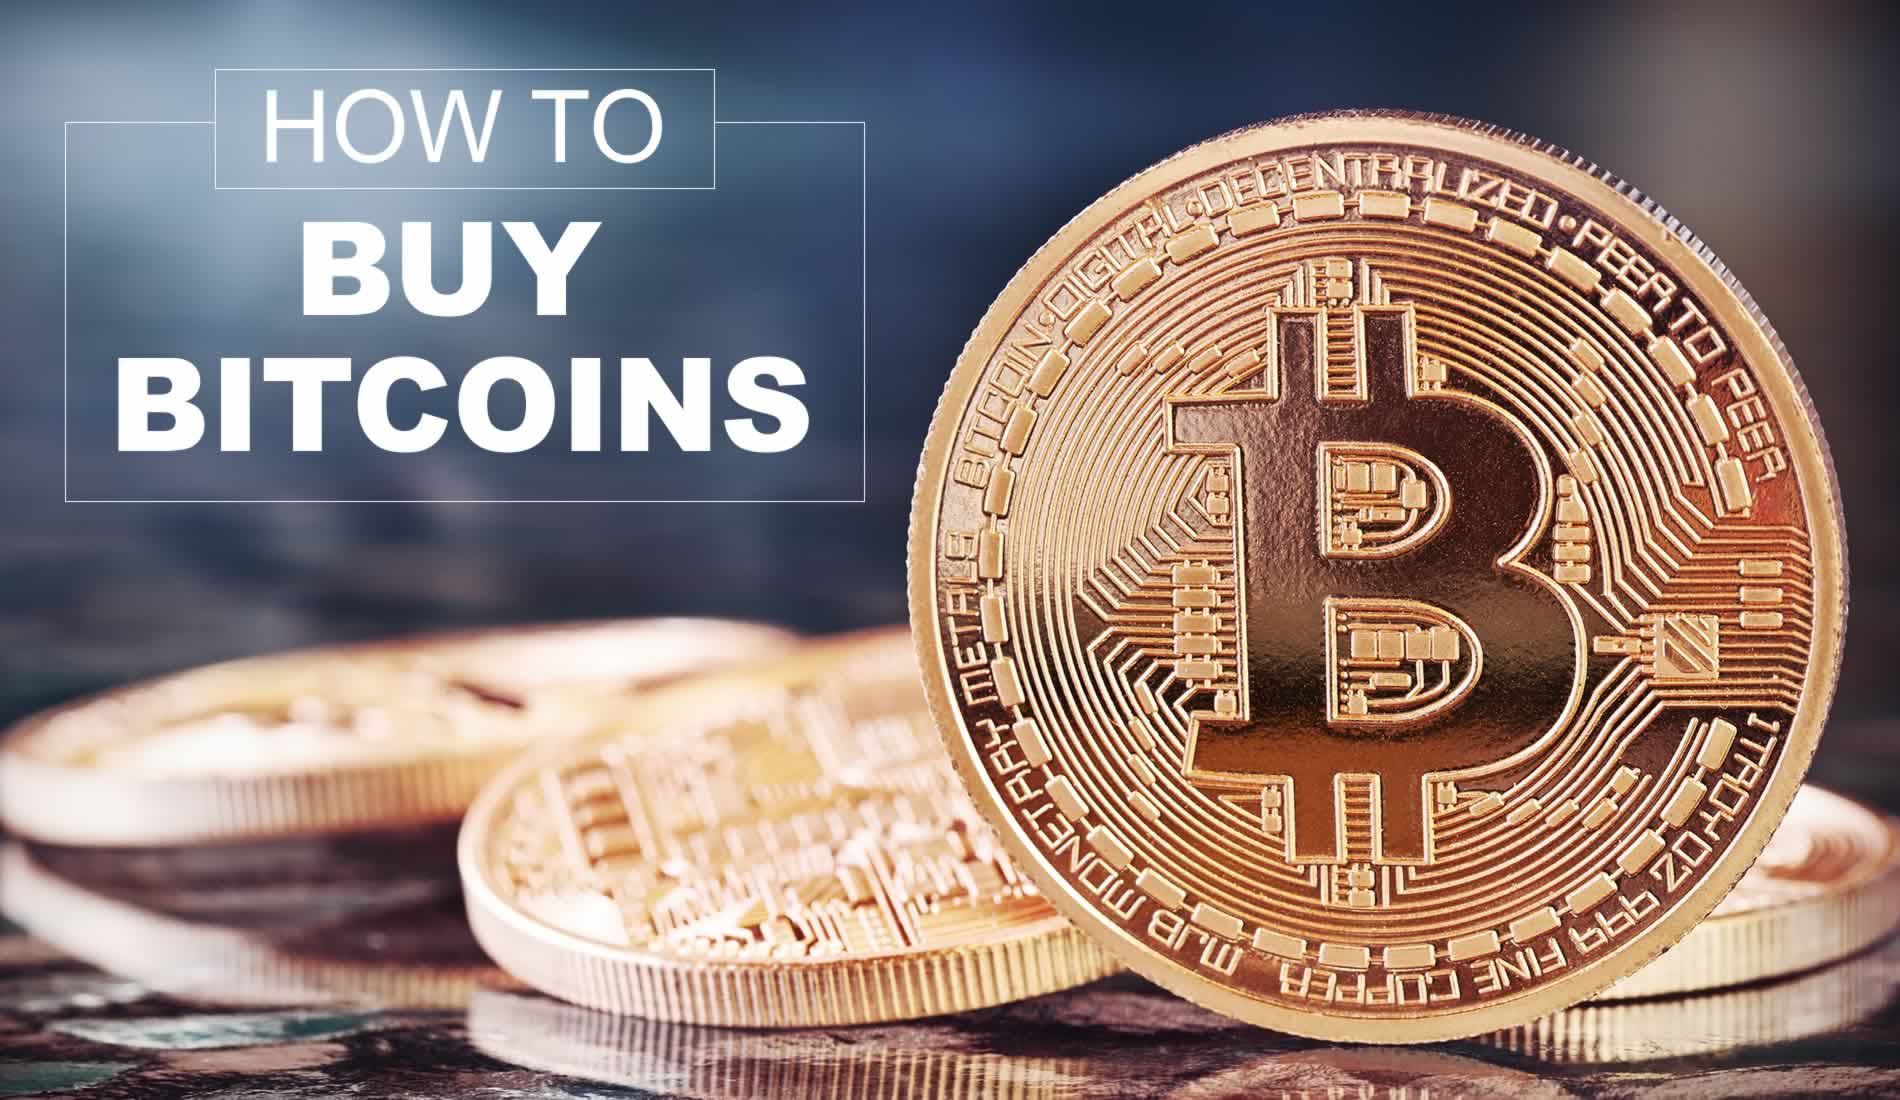 How to buy bitcoin fast